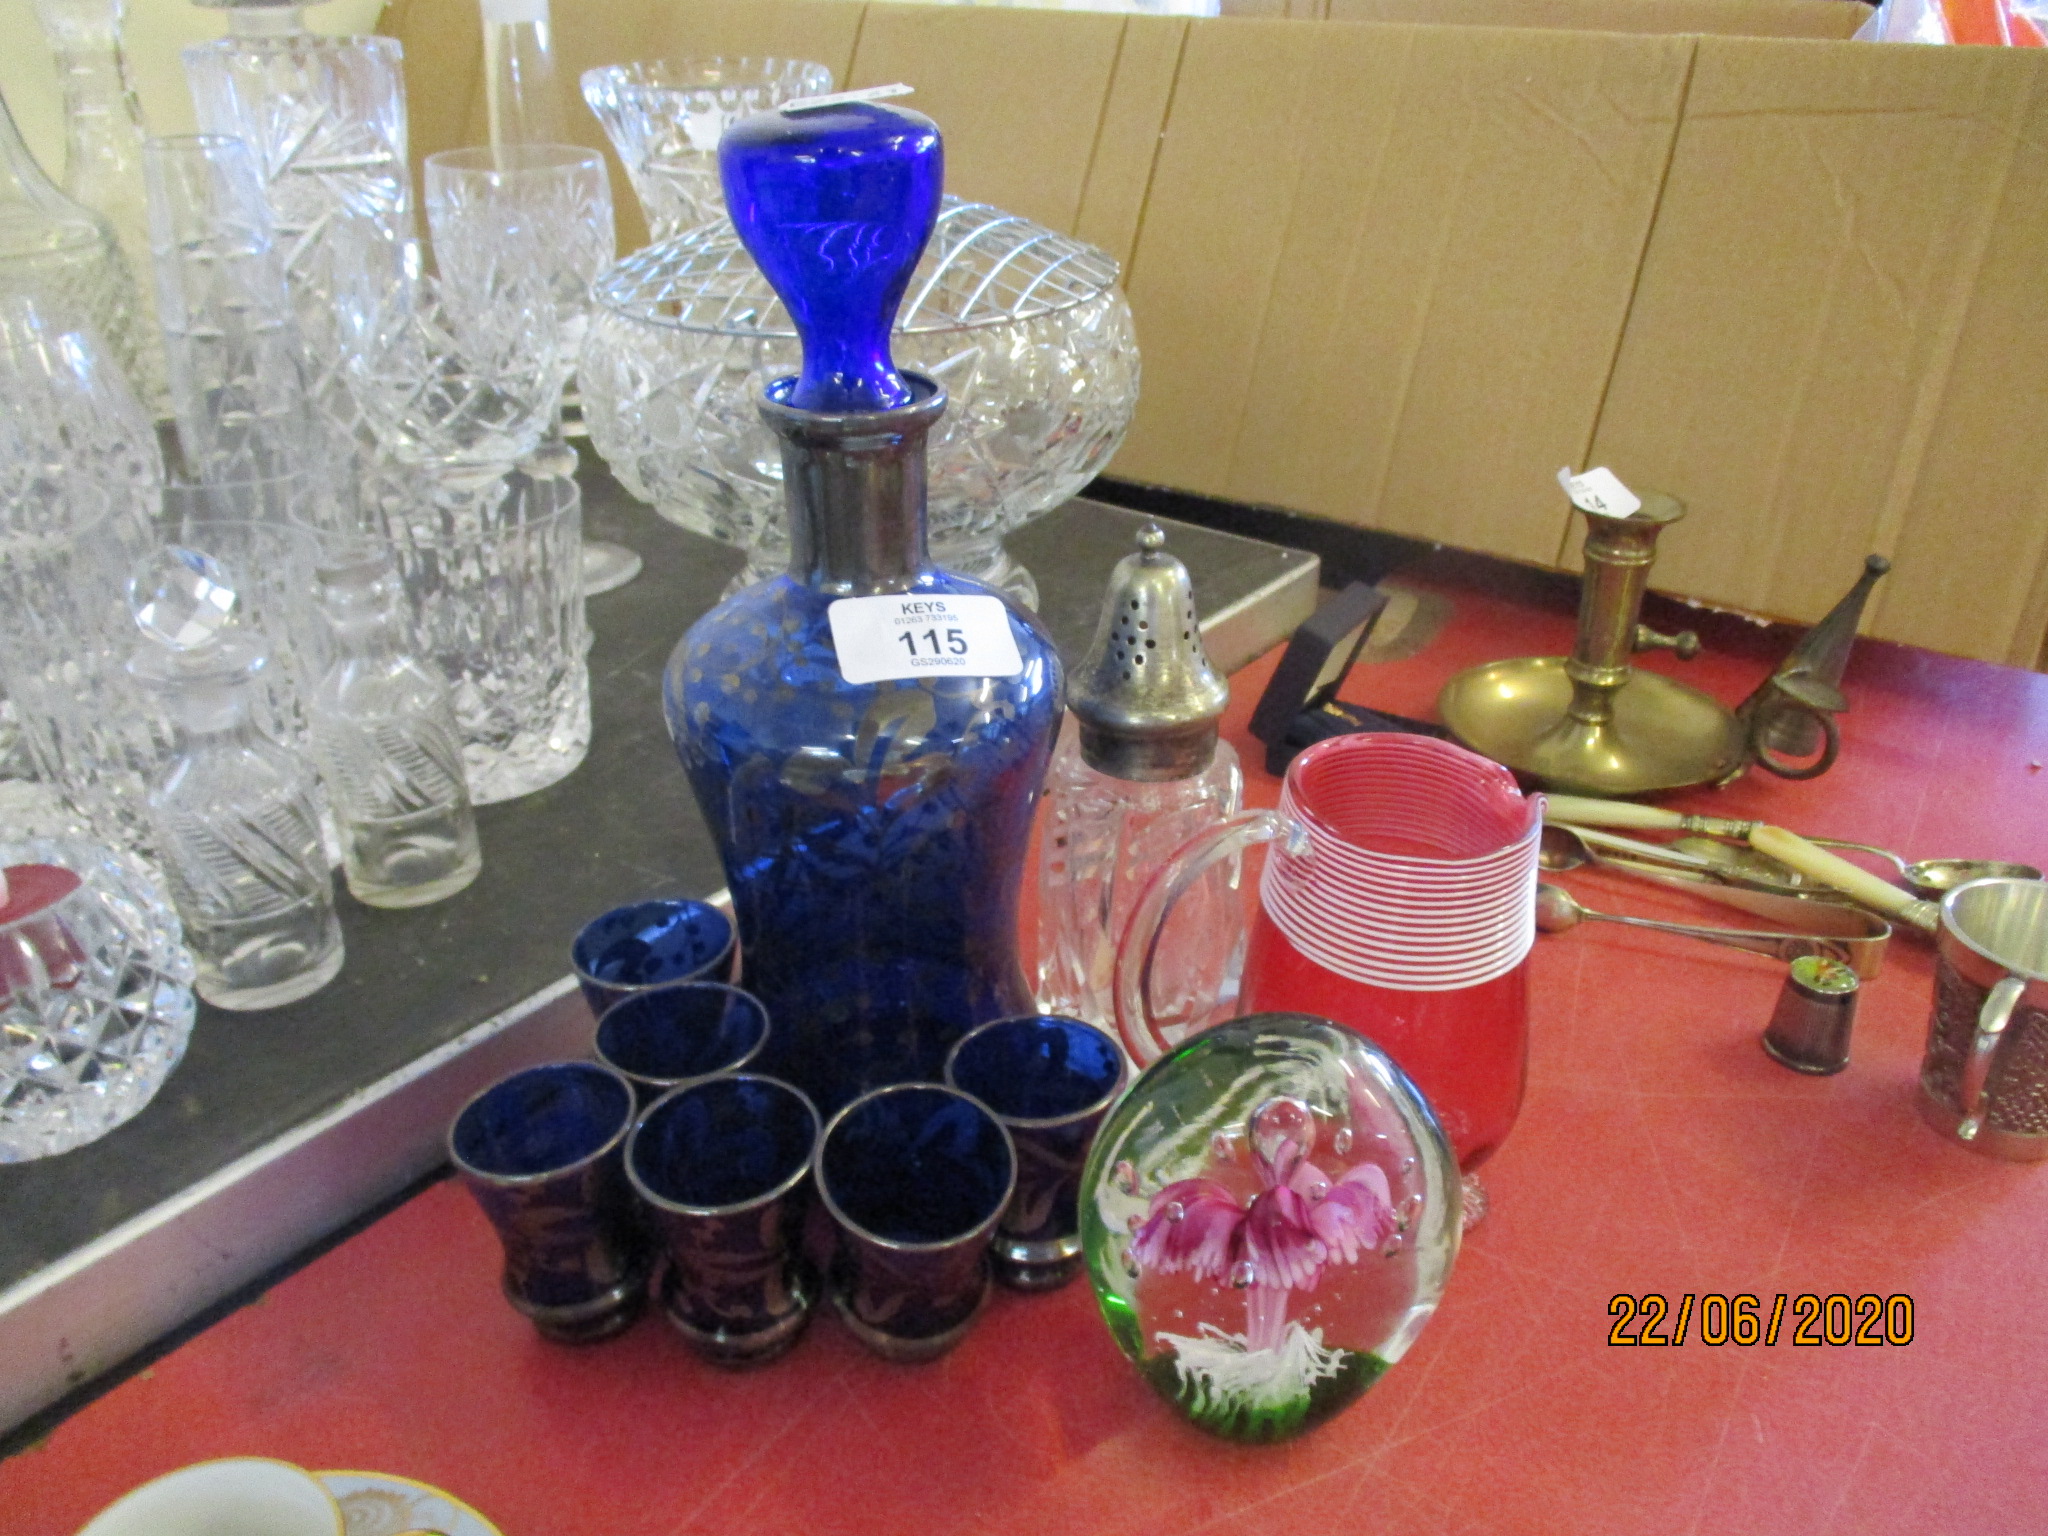 QUANTITY OF VARIOUS GLASS WARES INCLUDING PAPERWEIGHT, DECANTER, SHOT GLASSES ETC